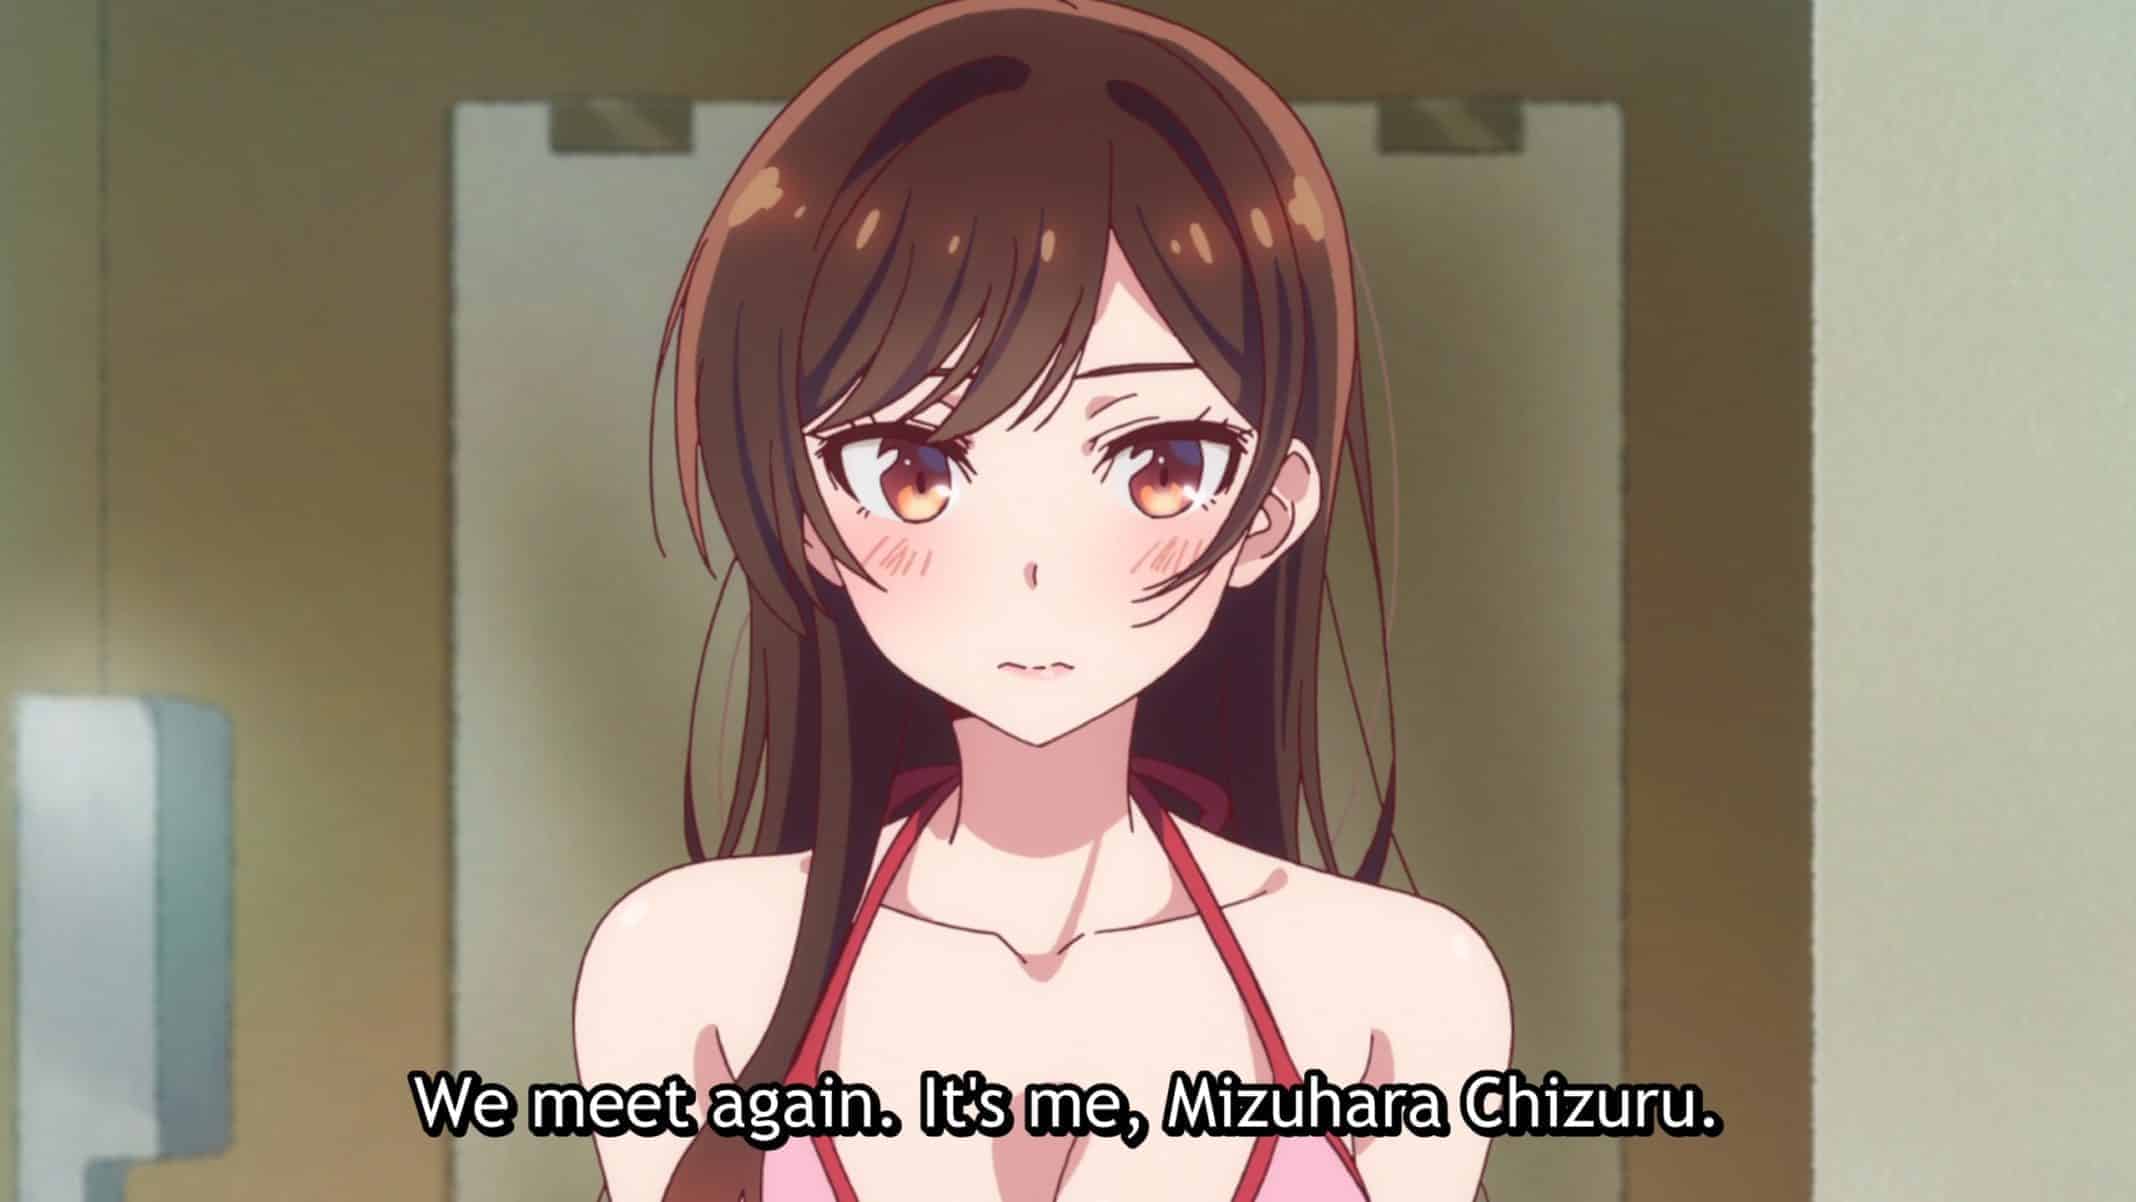 Chizuru stepping out of a bathroom in a swim suit.